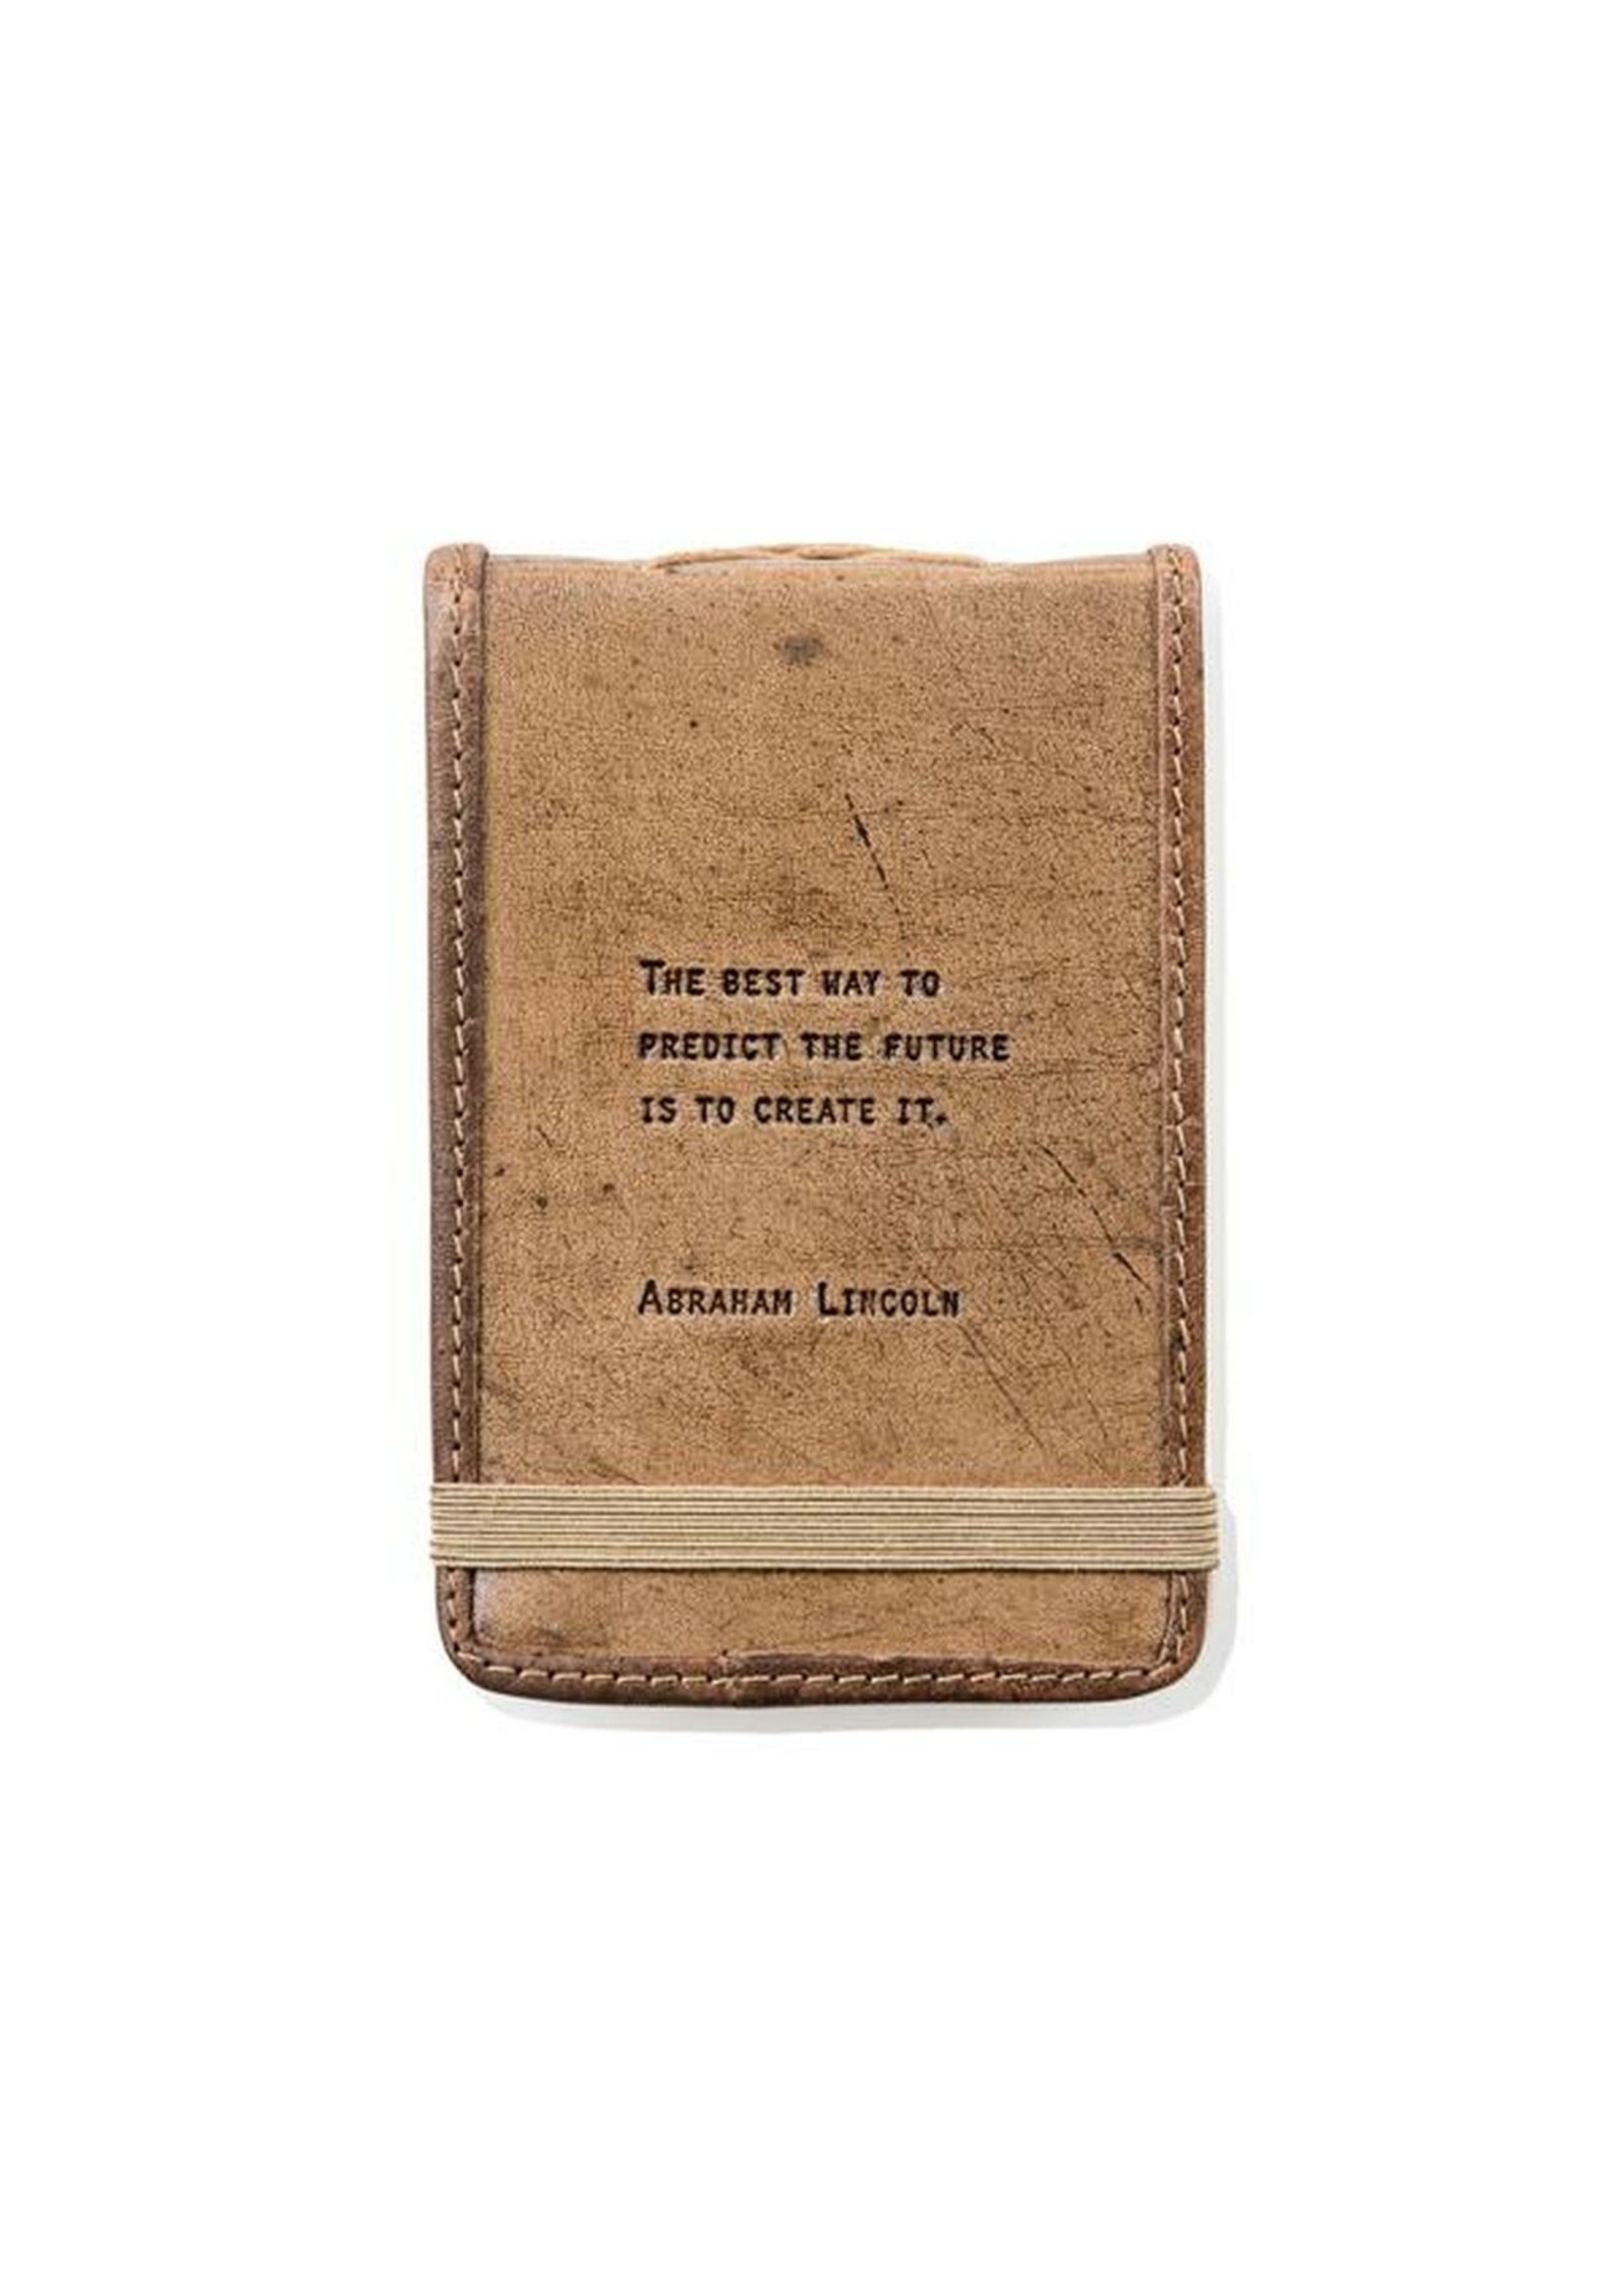 Sugarboo Mini Leather Journal -Abraham Lincoln (4x6)